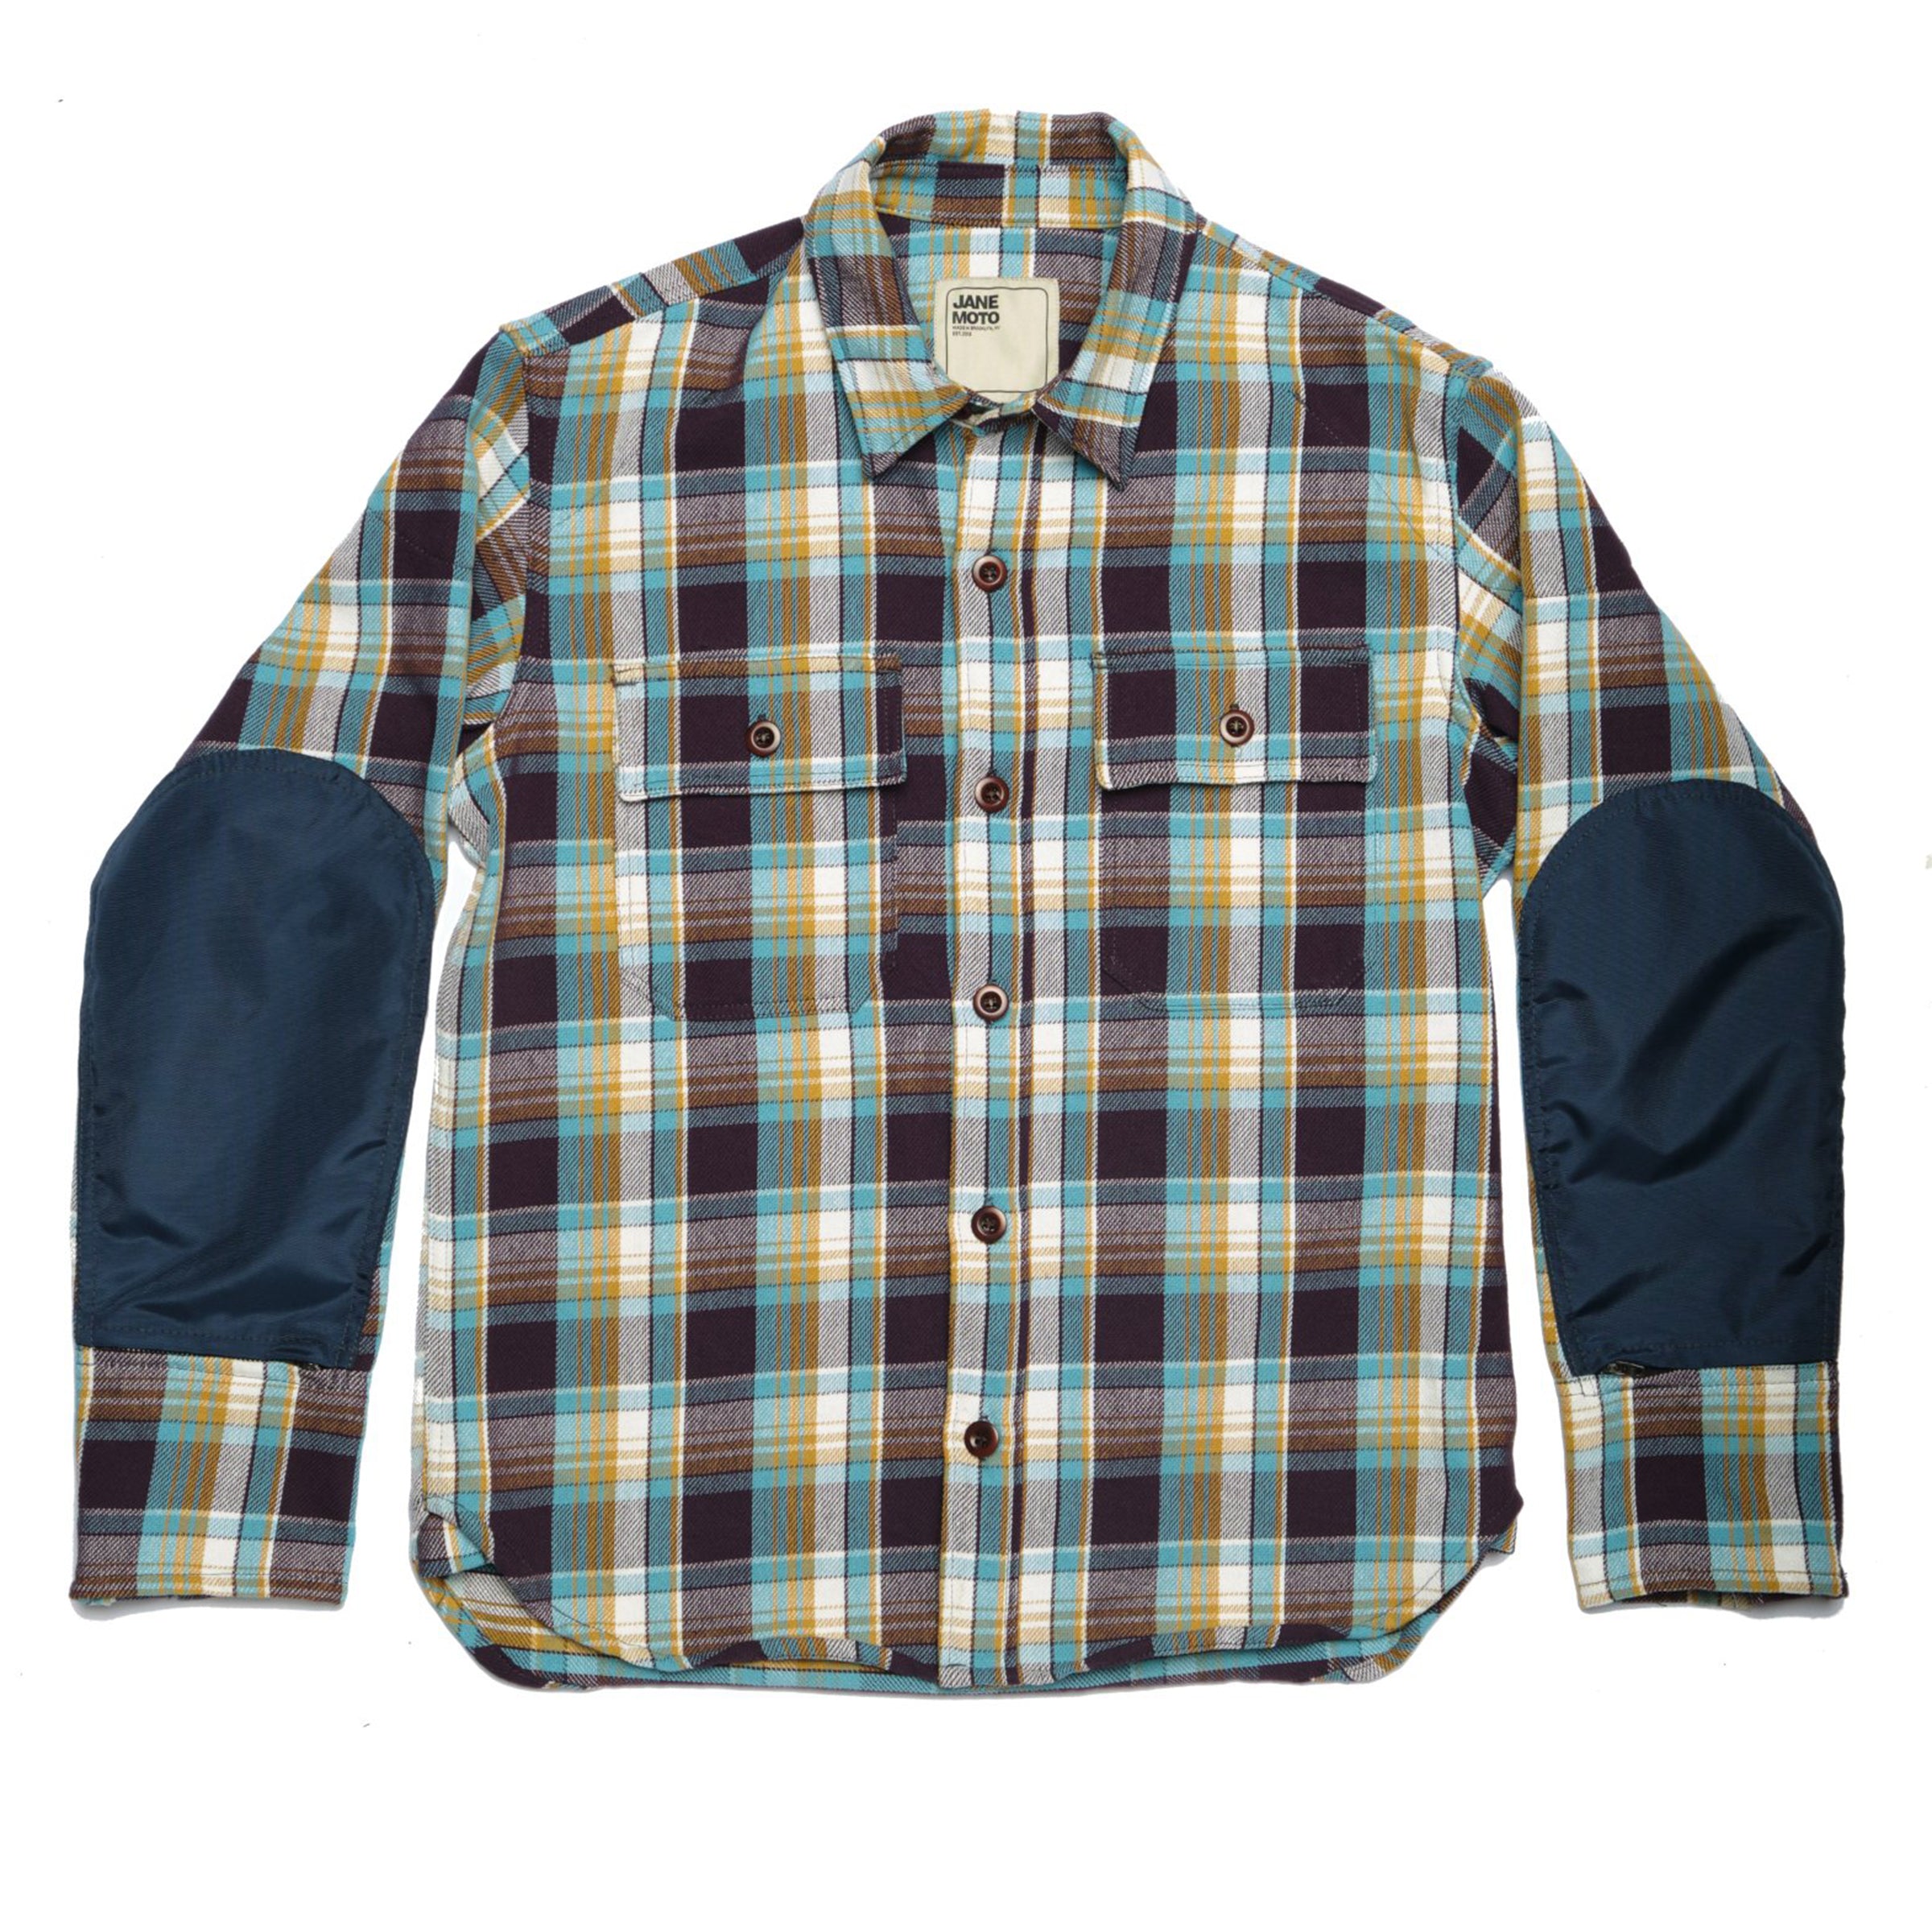 THE MERCER Riding Shirt -Blue Plaid Flannel - Limited Edition